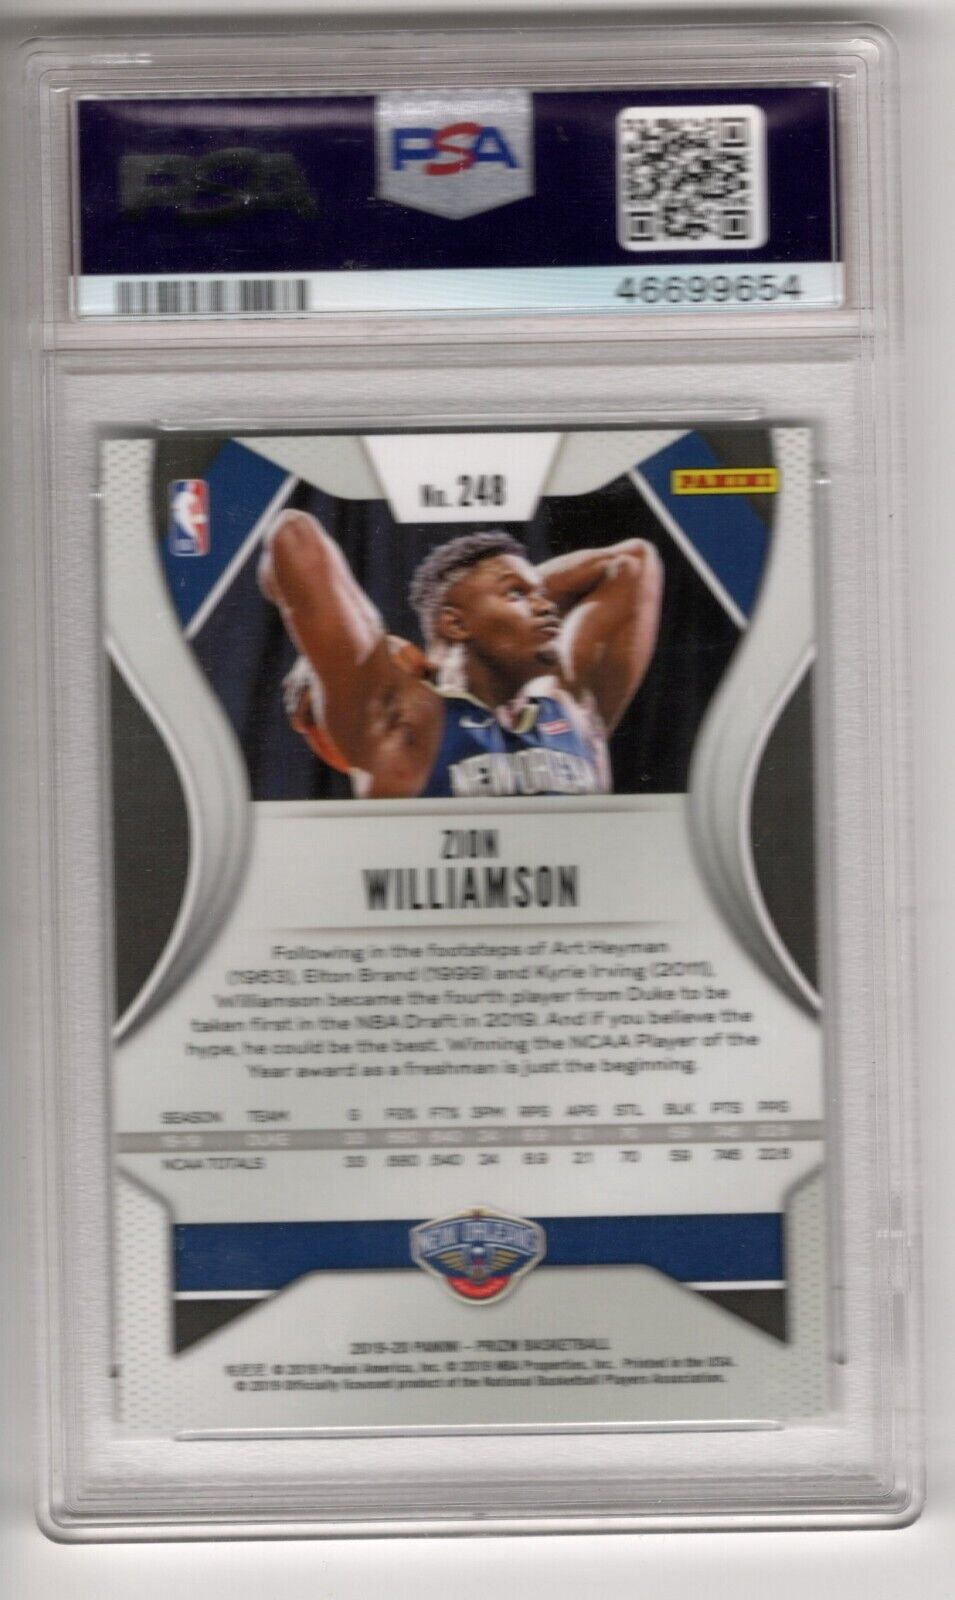 2019/20 Panini Prizm Basketball #248 Zion Williamson Rookie Card RC PSA 10 - 643-collectibles